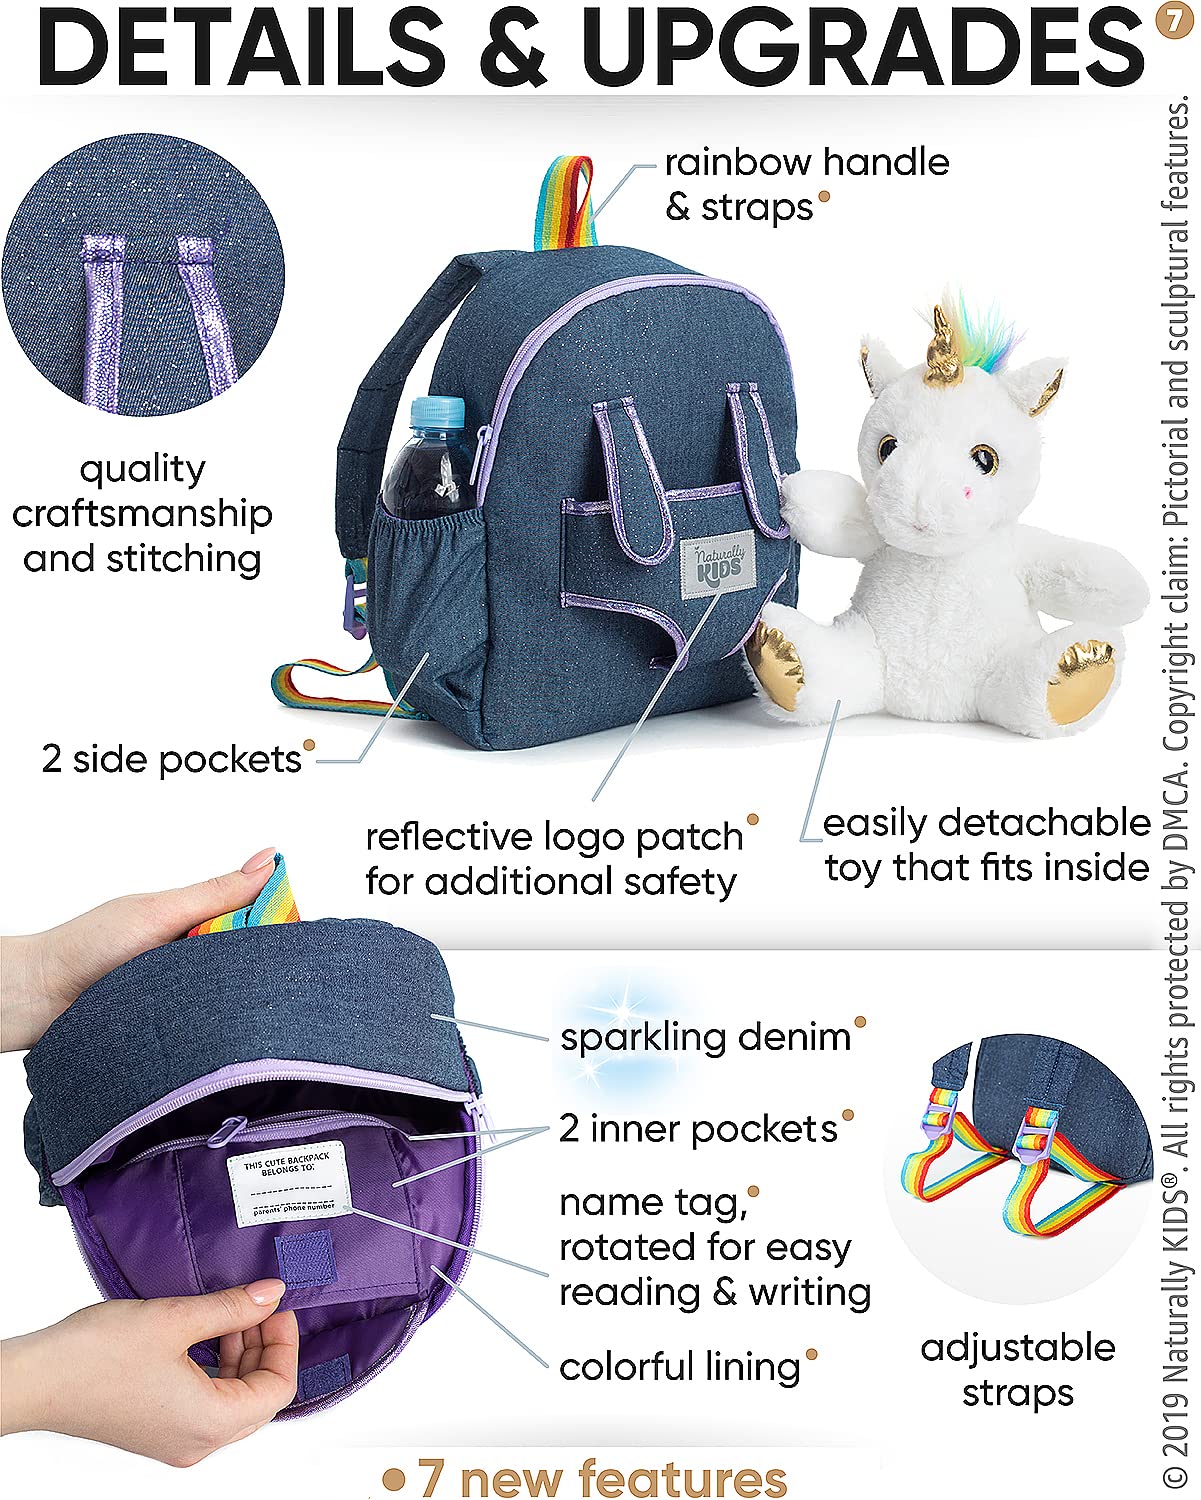 Naturally KIDS Backpacks - Toddler Backpack for Boy Girl w Stuffed Animal - Gifts for 3 4 5 Year Old Boys Girls